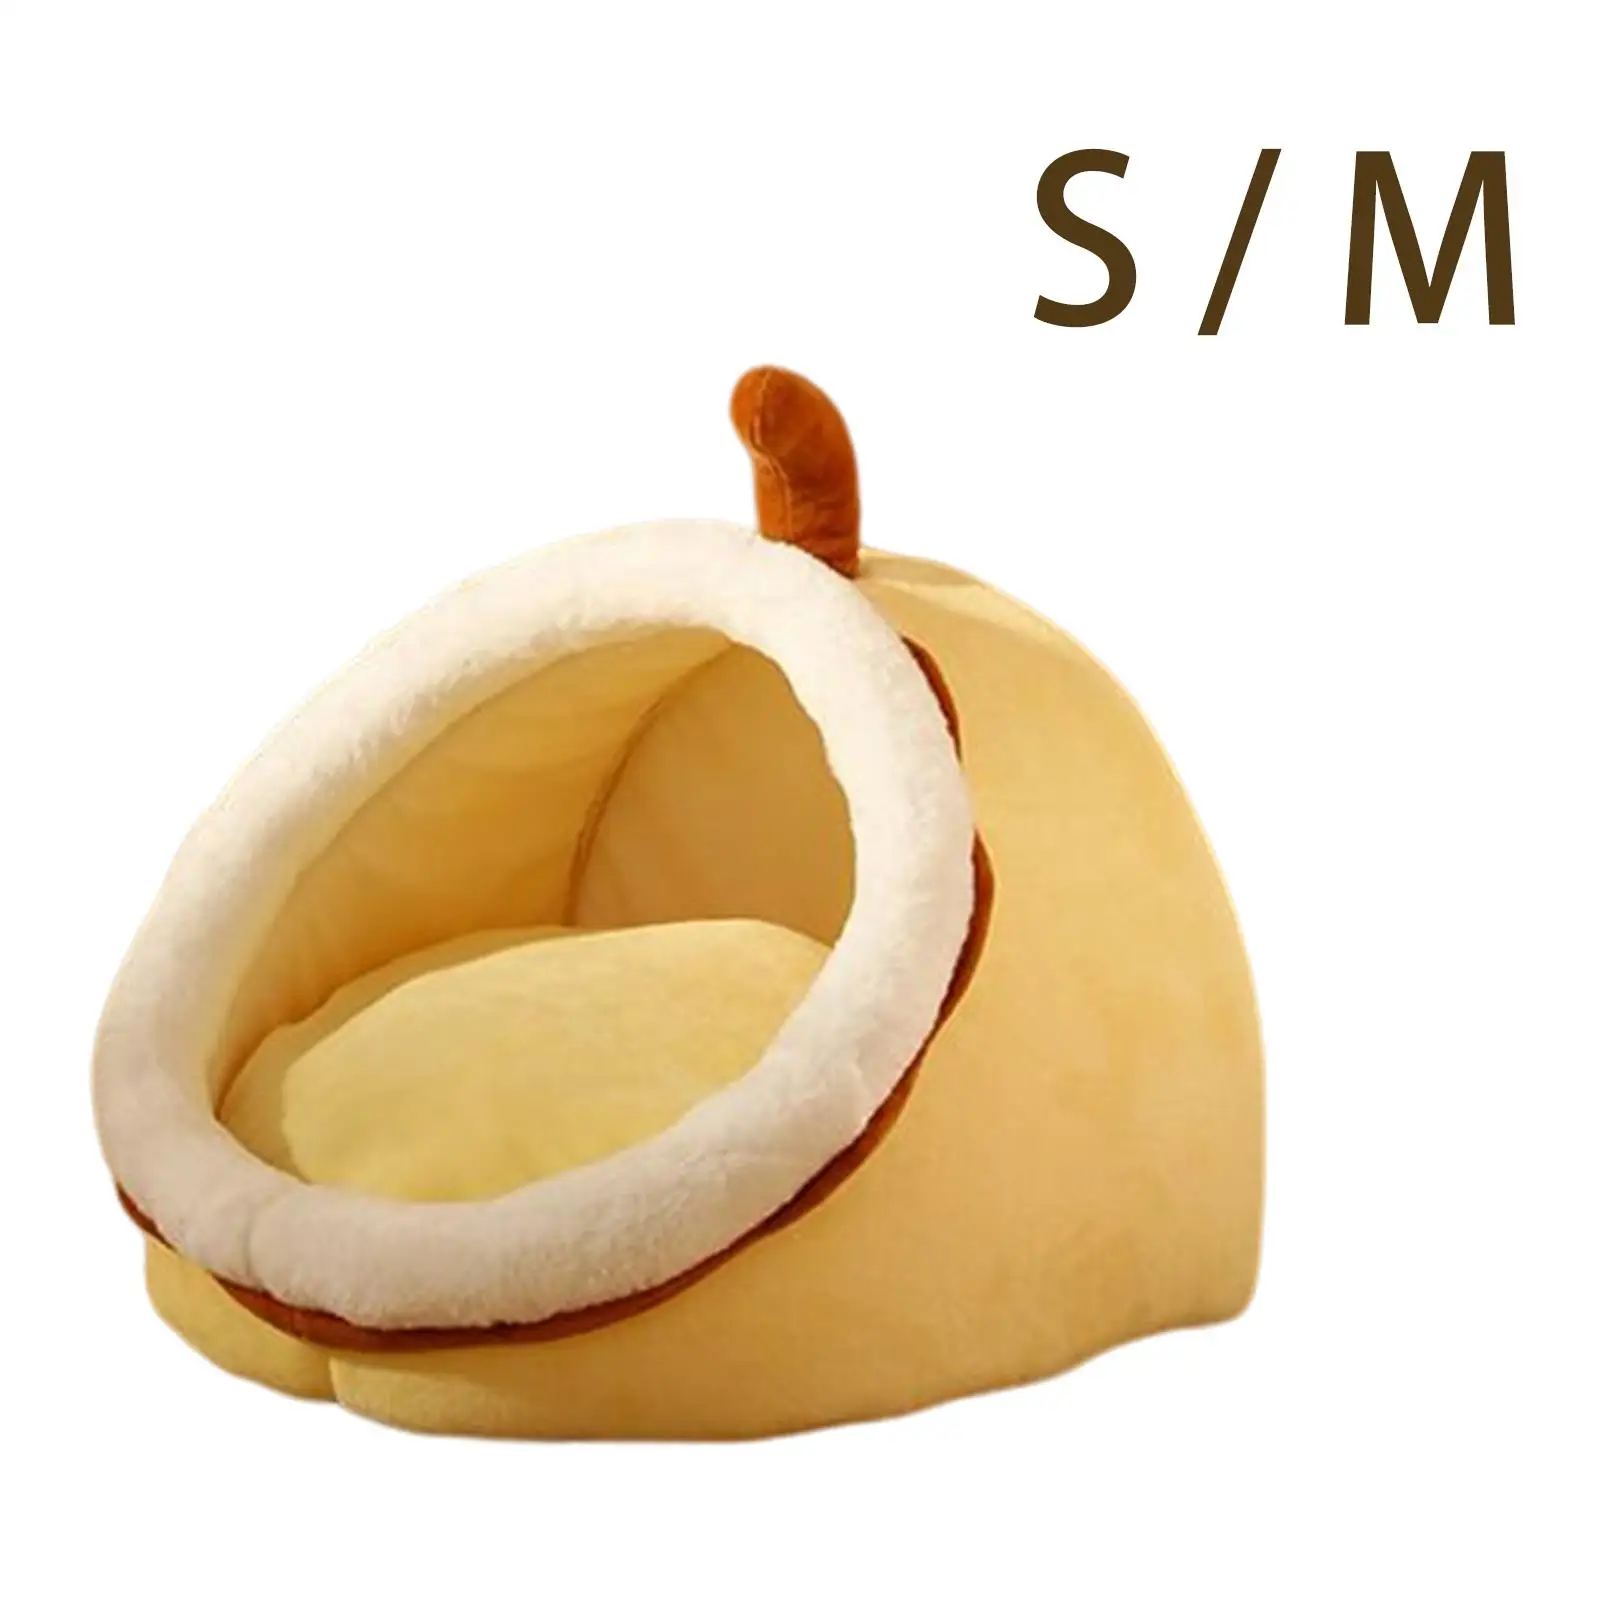 Cute Bed Anti Slip Bottom Soft Mat Sleeping Bed Nest Cushion Soft Dog House Warm for Small Rabbits